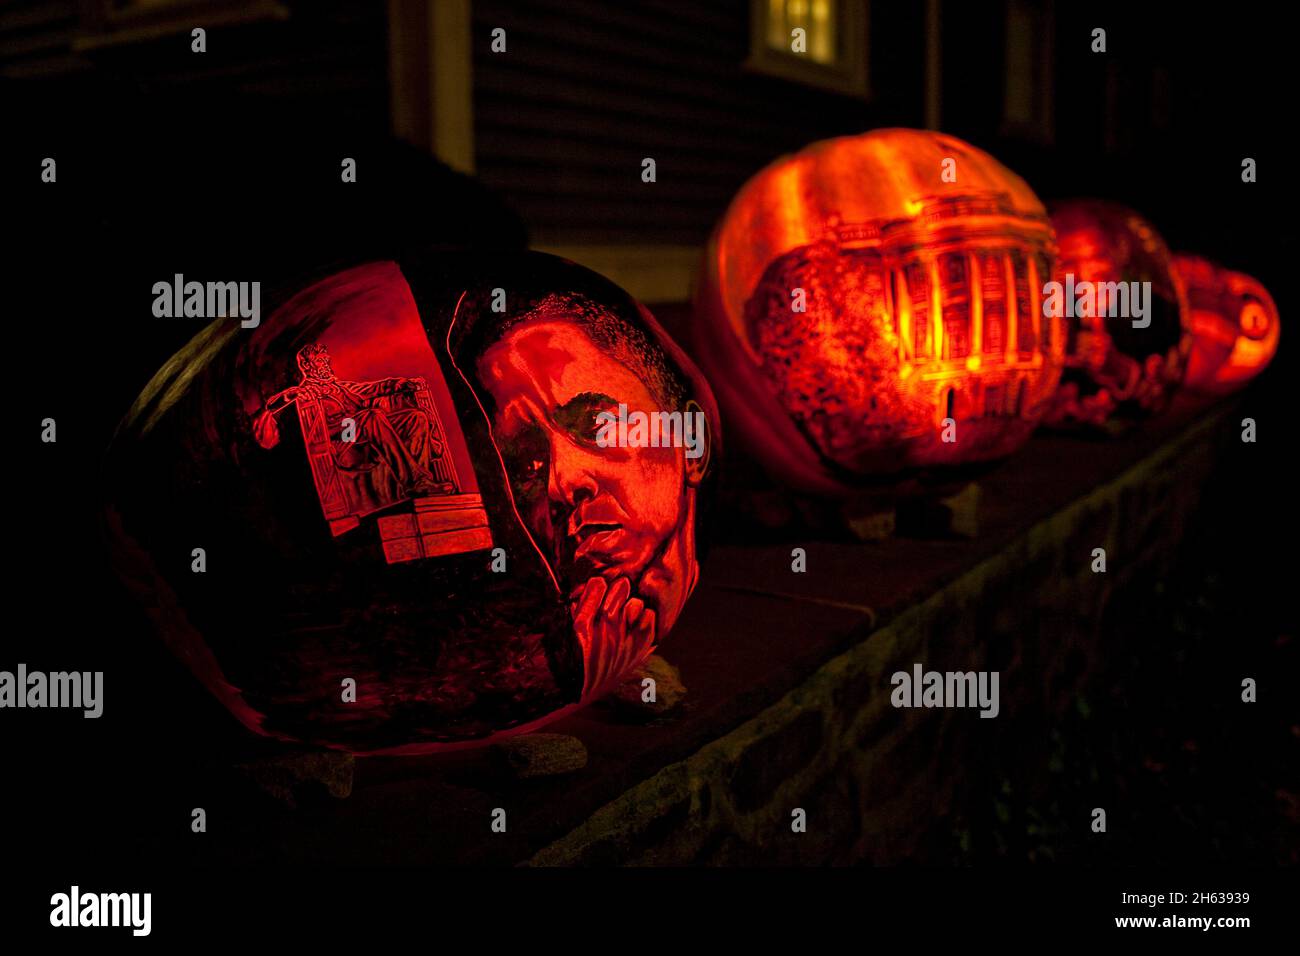 Carved pumpkins depicting President Barack Obama, Abraham Lincoln, and the White House decorate the outside of a home in Providence, R.I., Oct. 25, 2010. Stock Photo